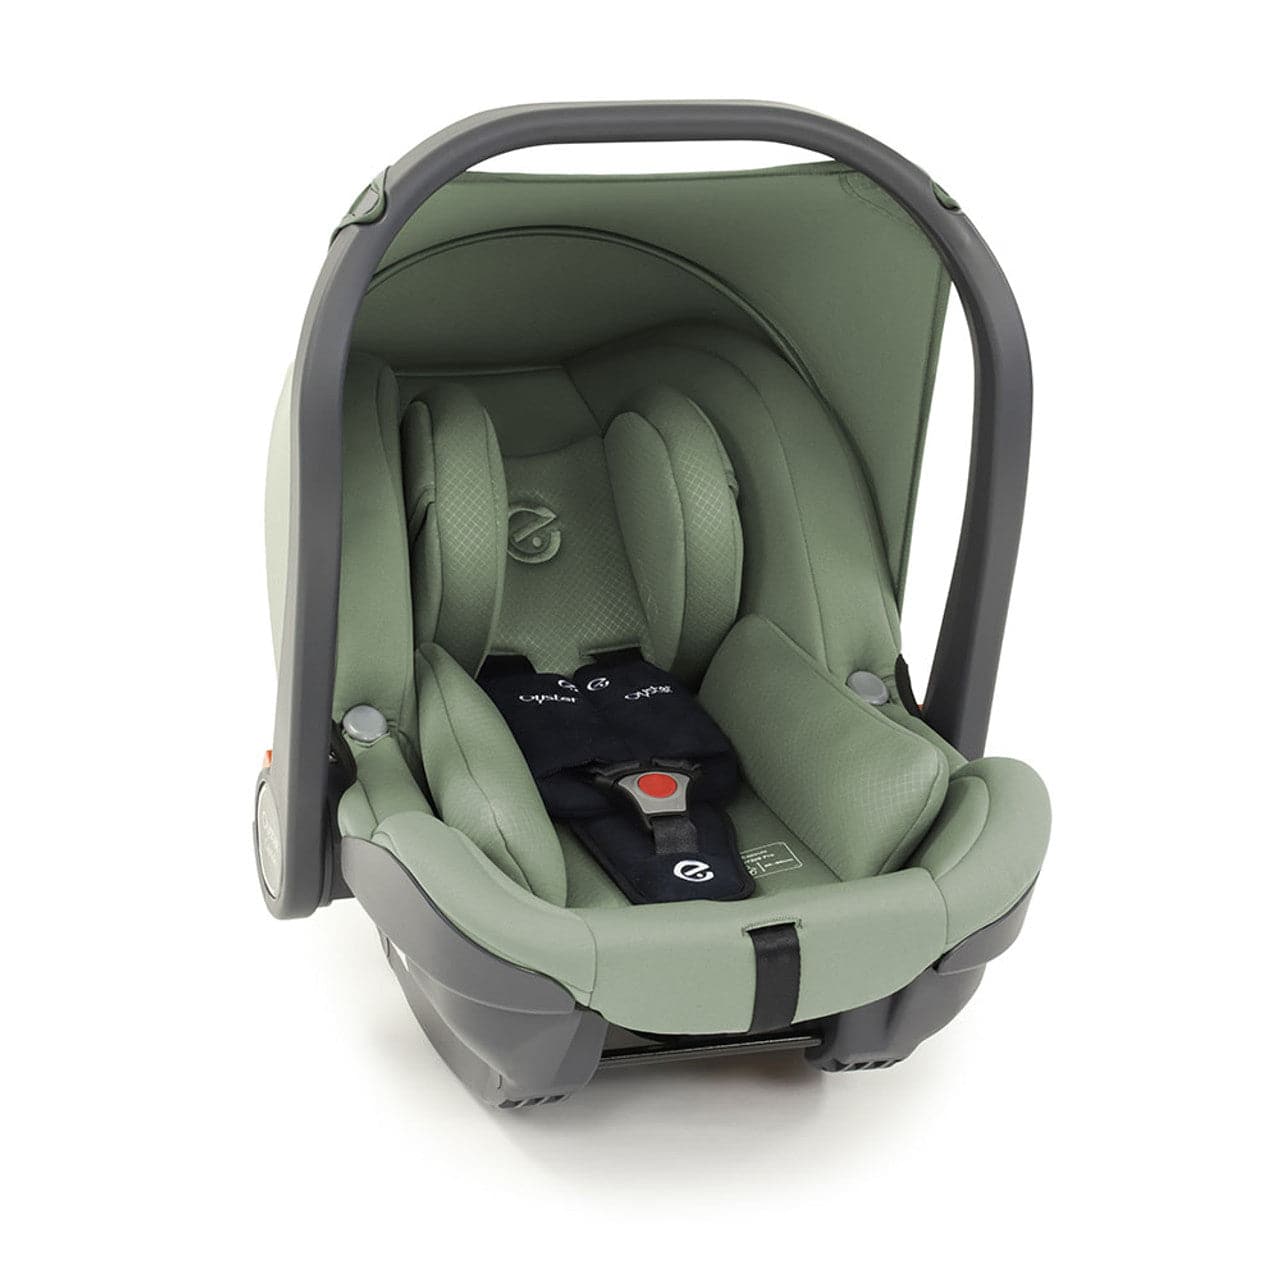 Babystyle Oyster Capsule Group 0+ Infant i-Size Car Seat - Spearmint - For Your Little One